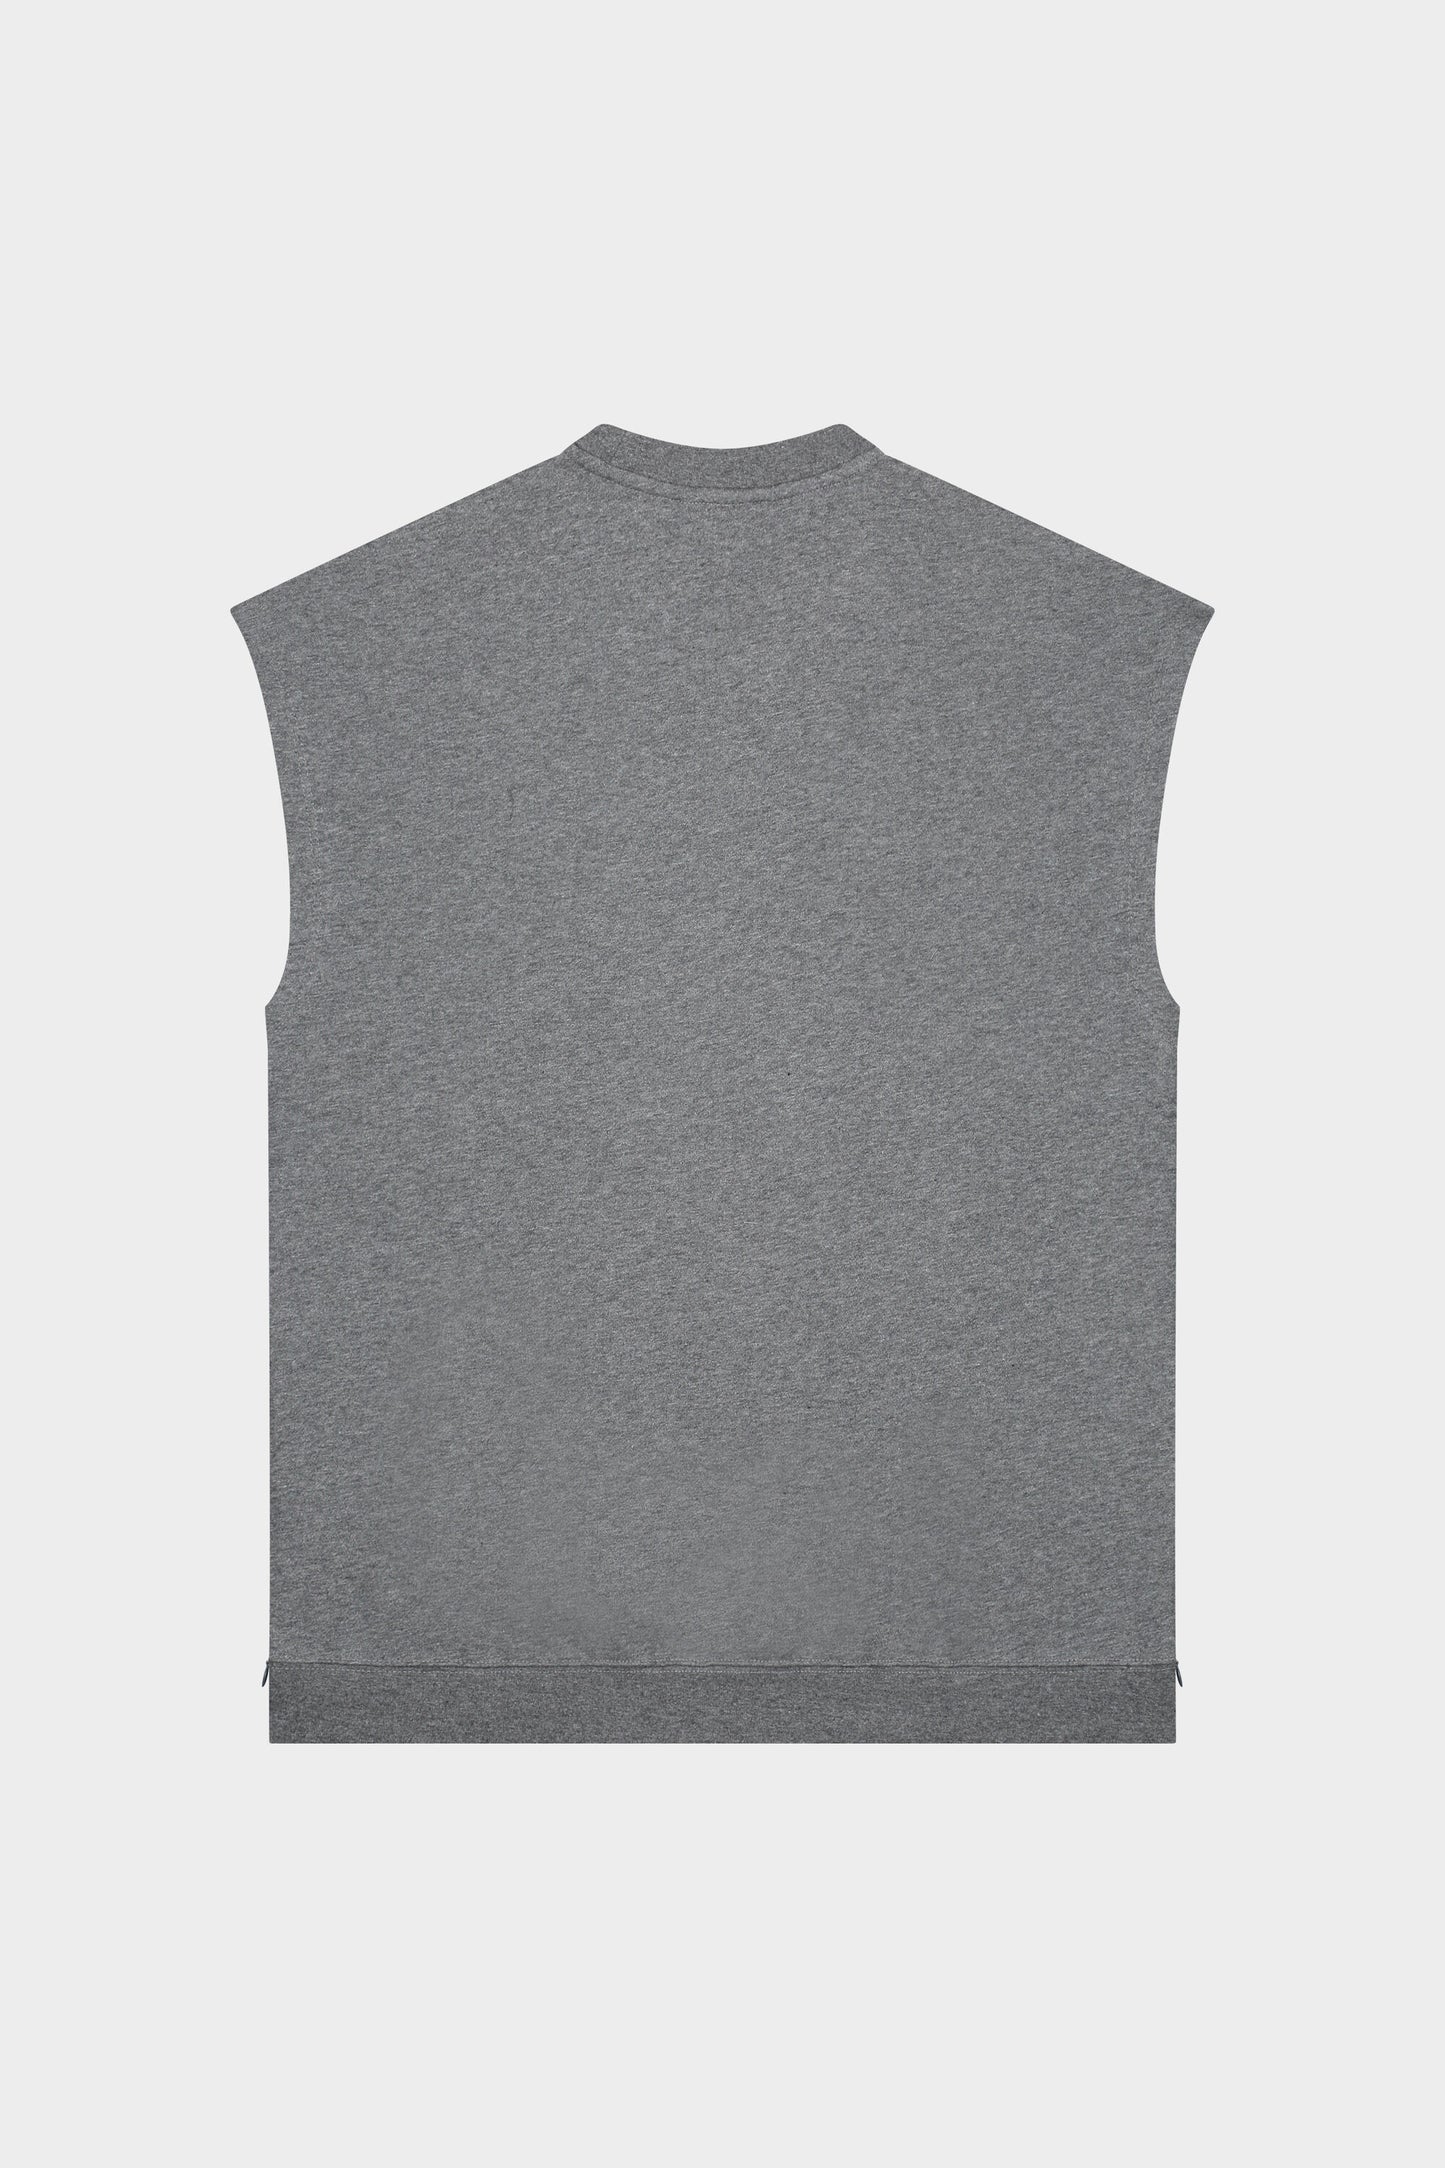 Embroidered LOAB Sleeveless Crew Neck Sweater Grey